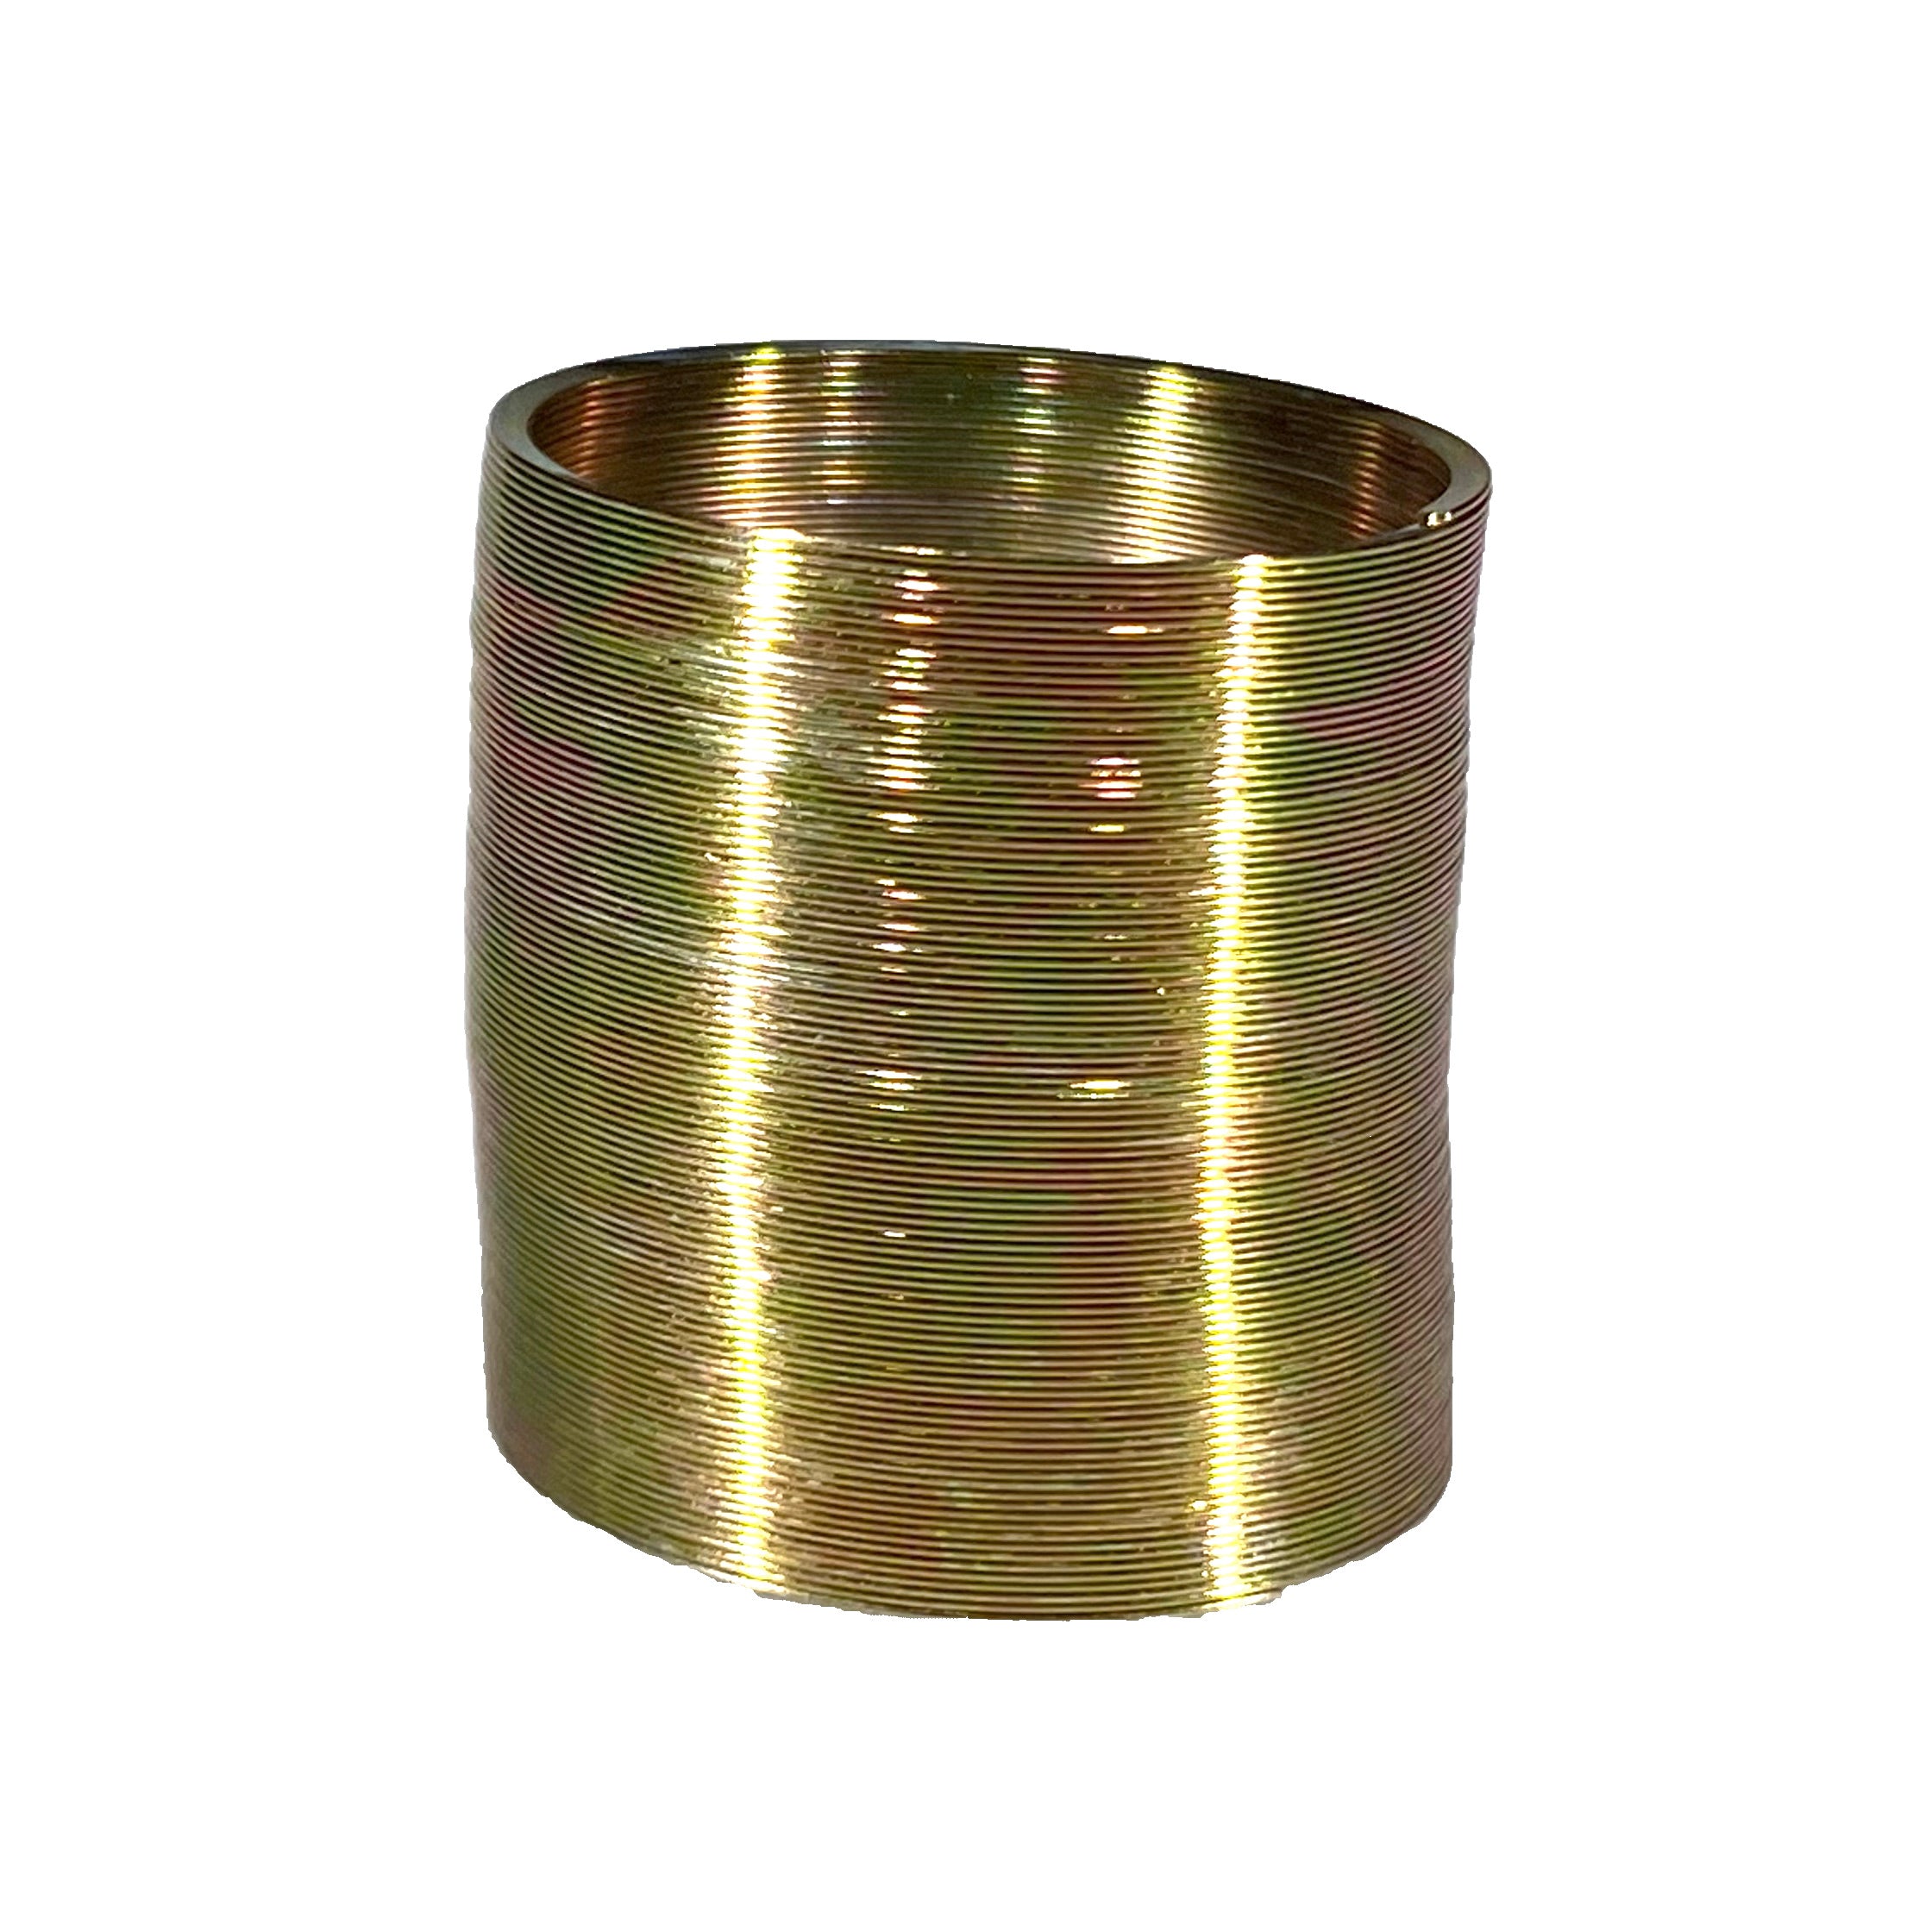 1 Inch Mini Metal Spring - Silver, Gold or Pink    